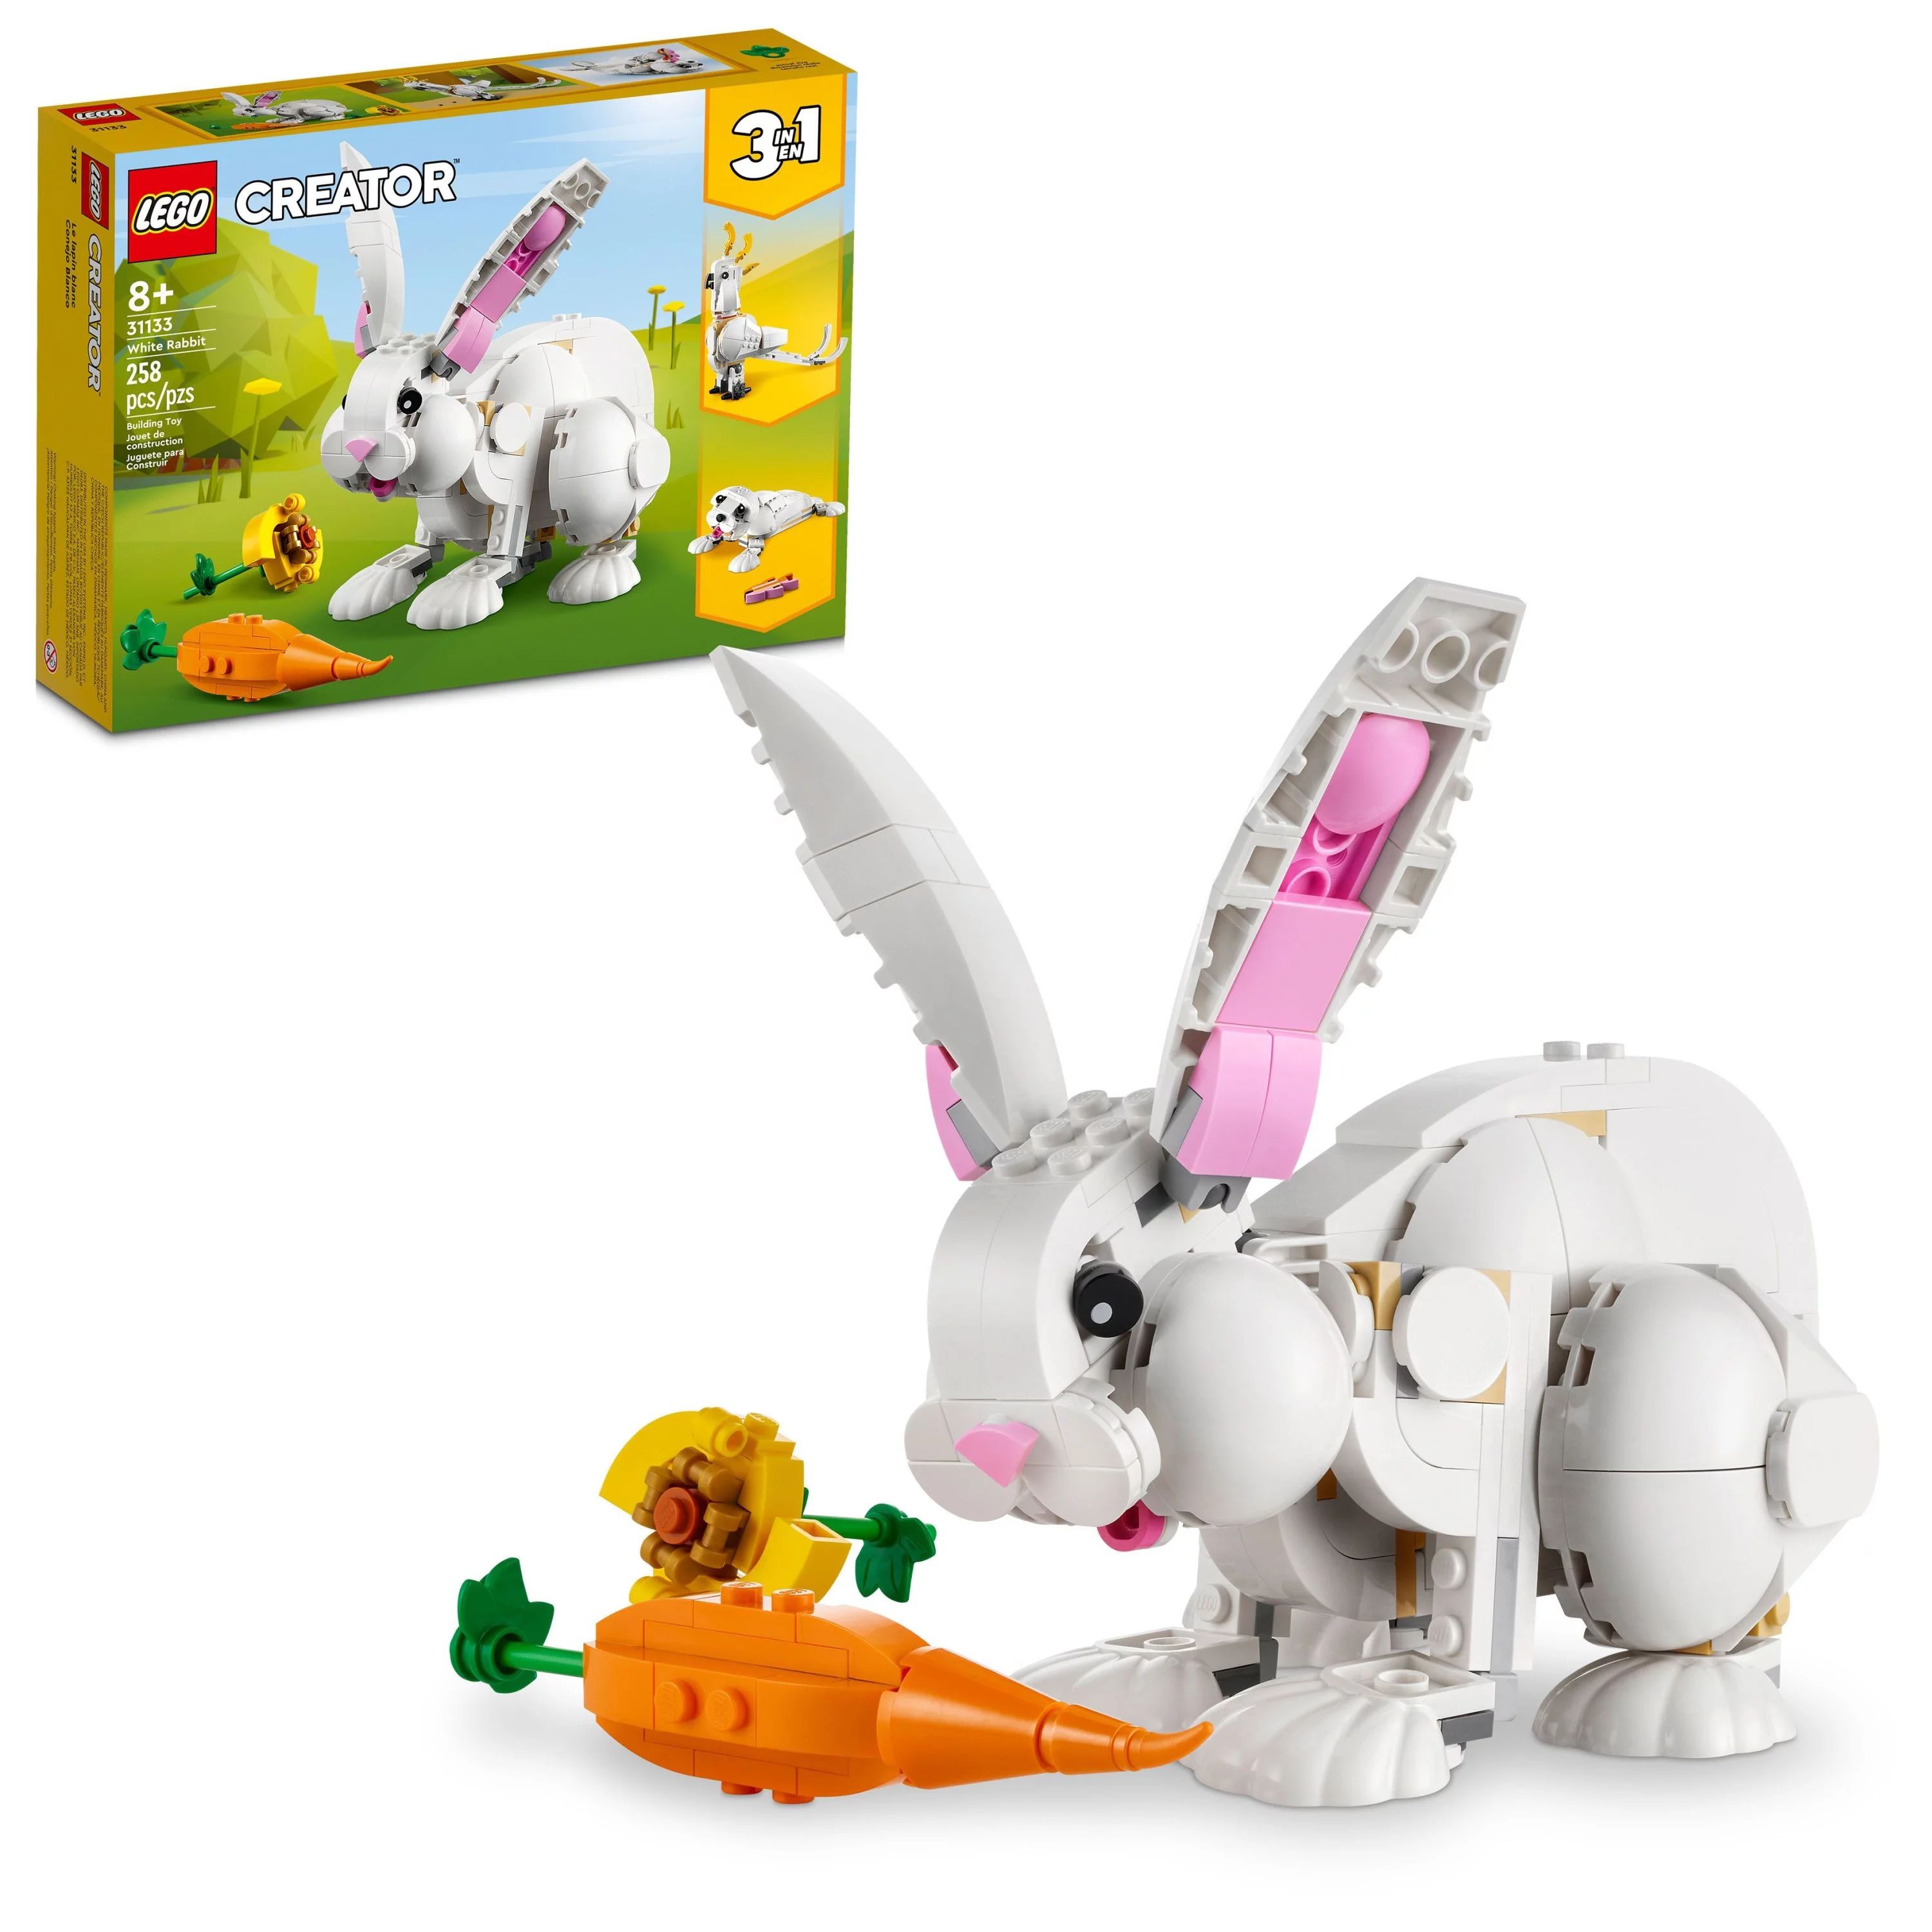 LEGO Creator 3in1 White Rabbit Animal Toy Building Set 31133, Easter Bunny to Seal and Parrot Fig... | Walmart (US)